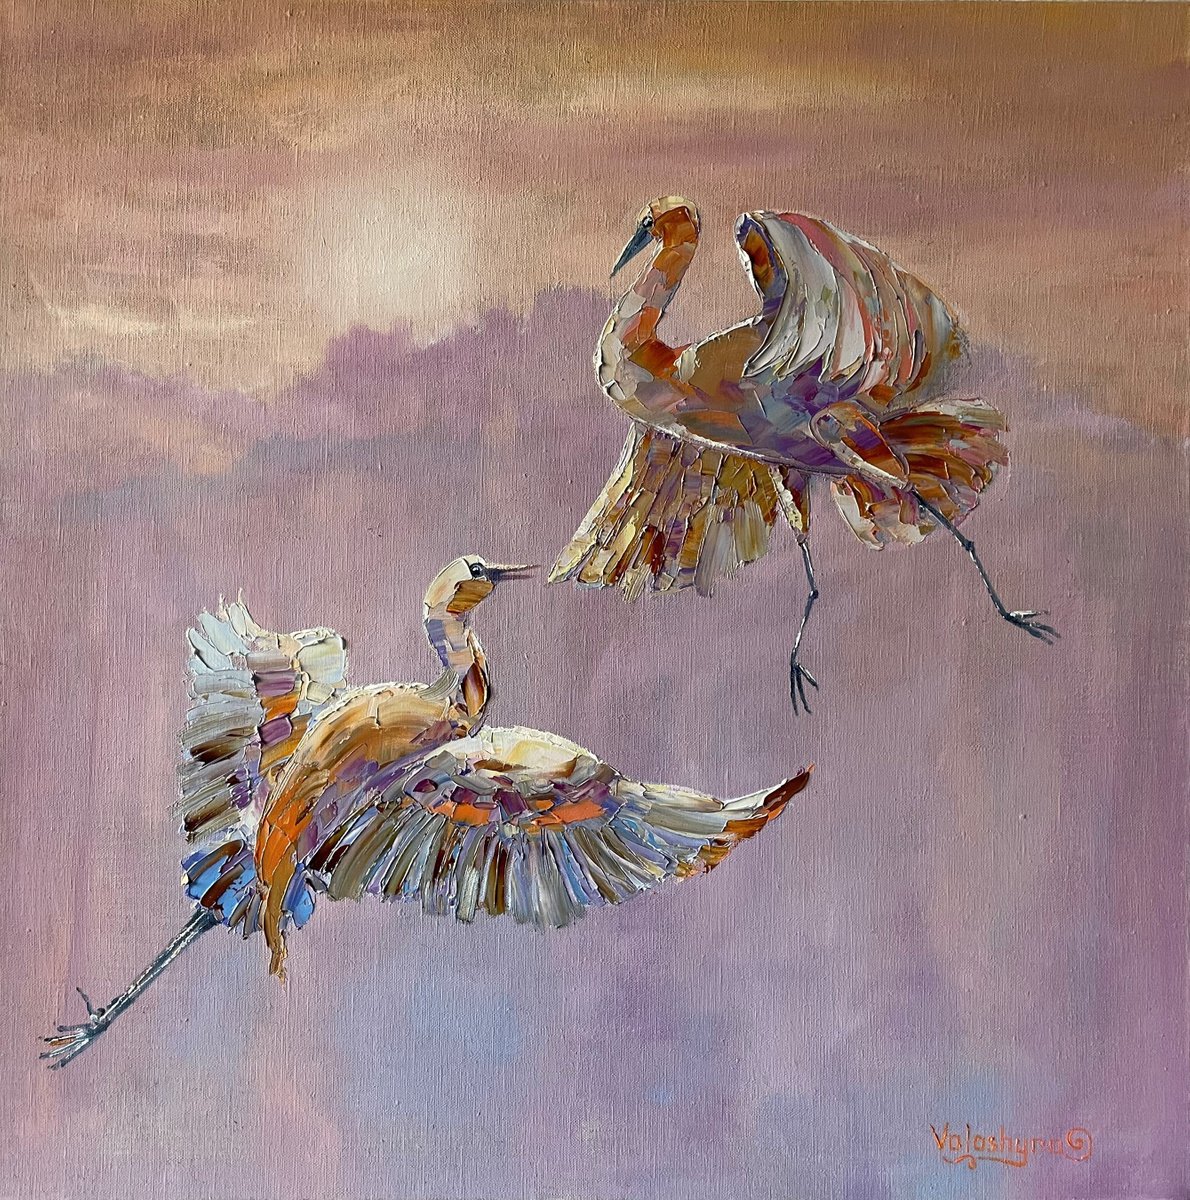 Dance in the air. Birds in flight. Birds oil painting. Birds flying in the distance by Mary Voloshyna